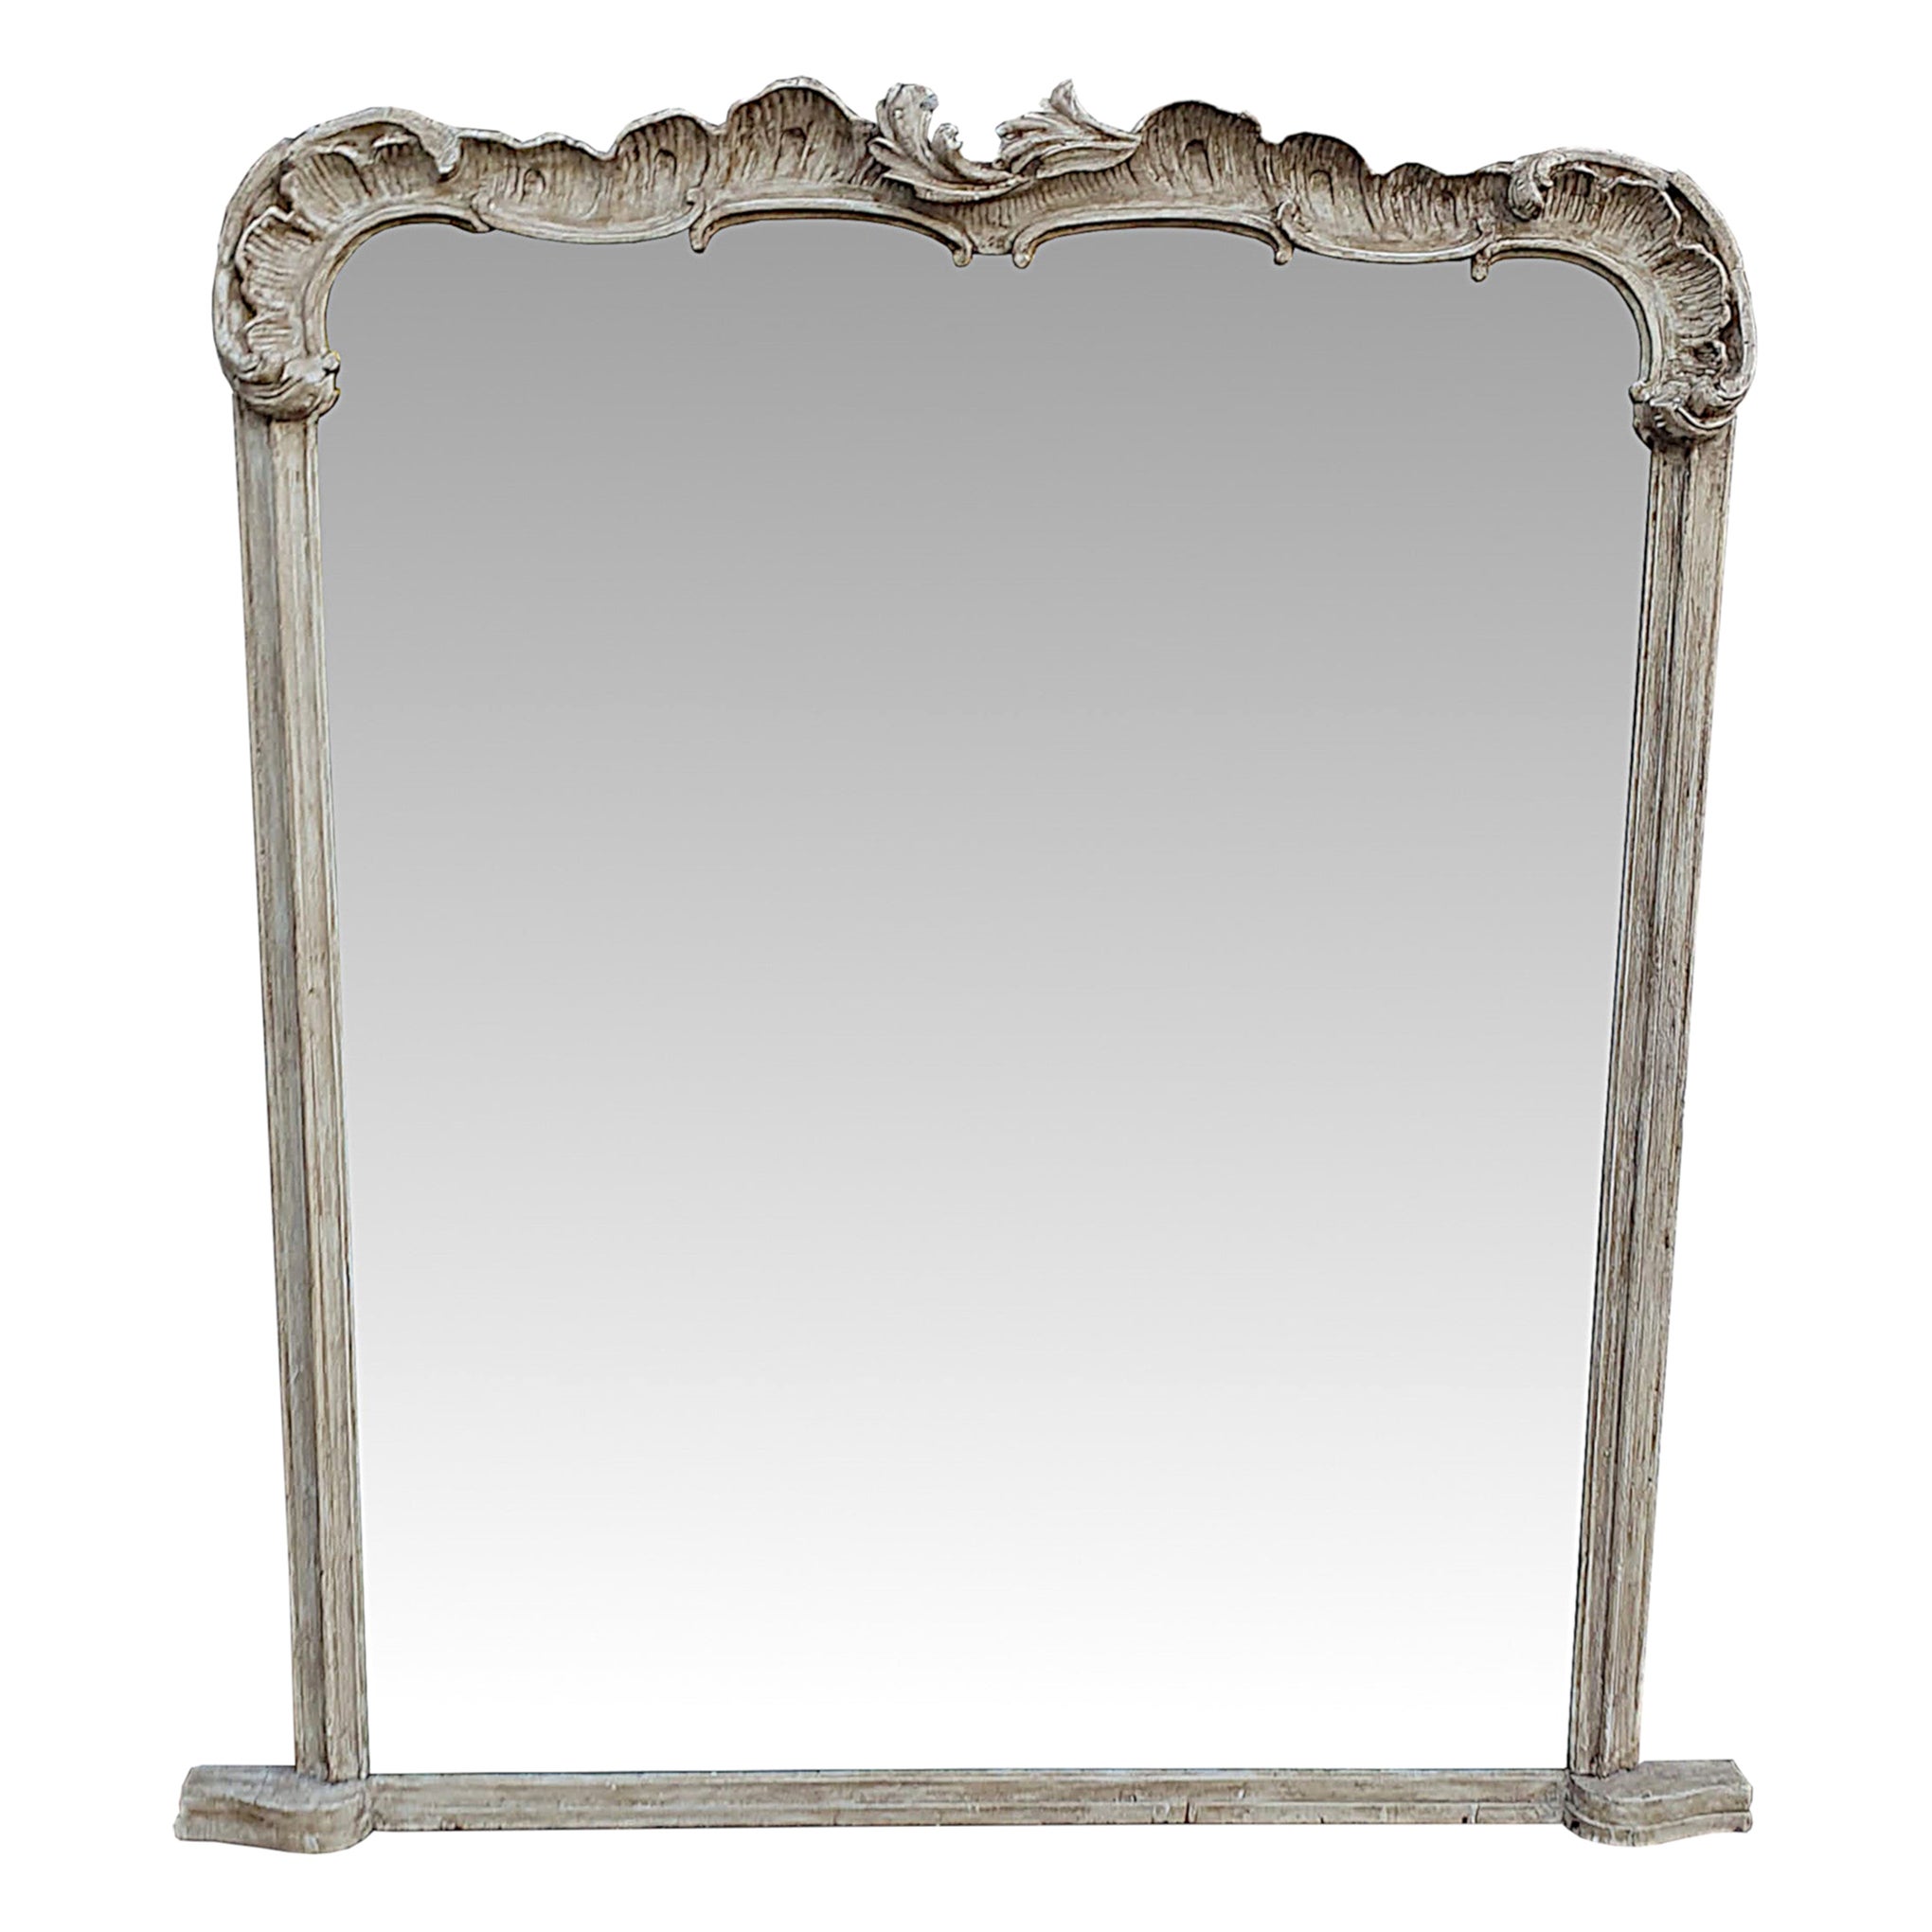 Fabulous Large Early 19th Century Overmantle Mirror